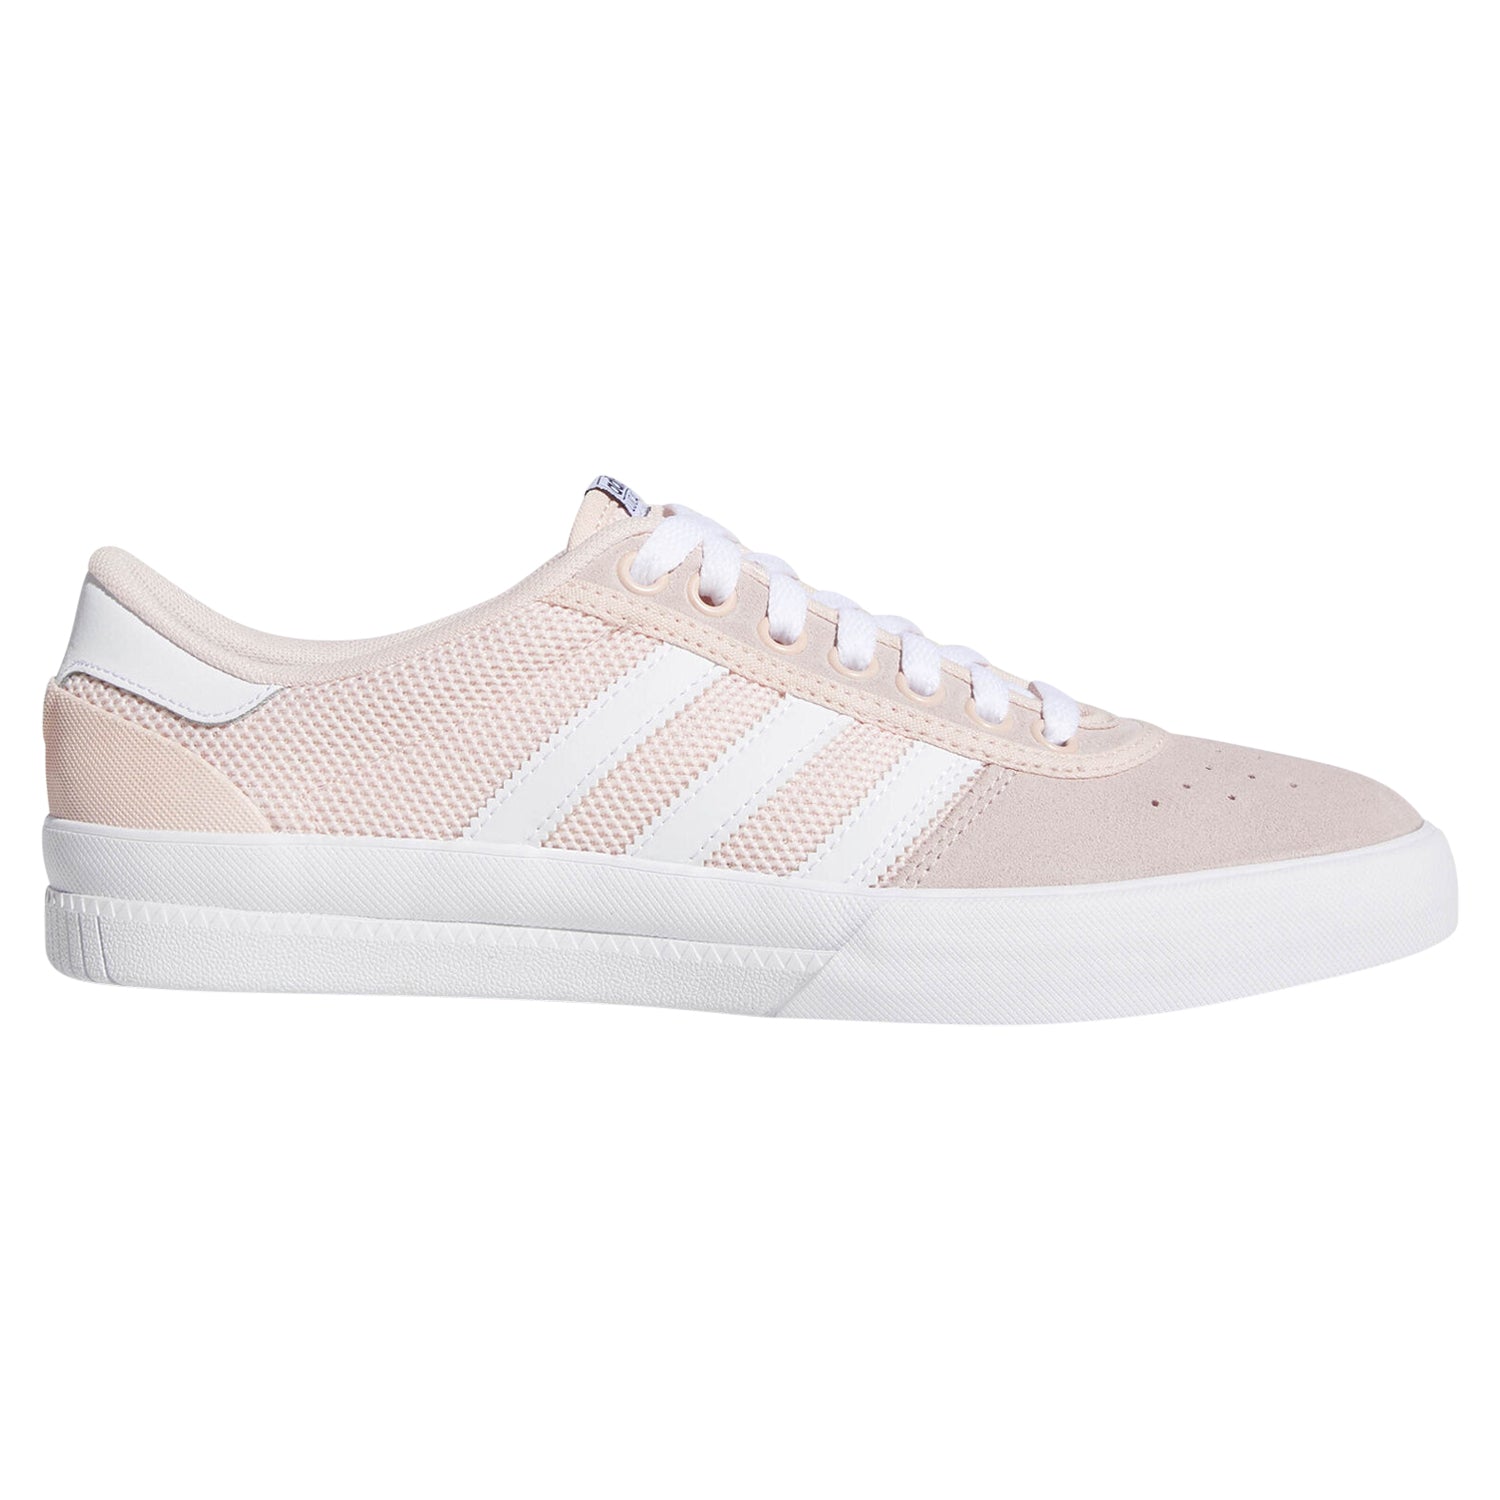 mens pink trainers uk